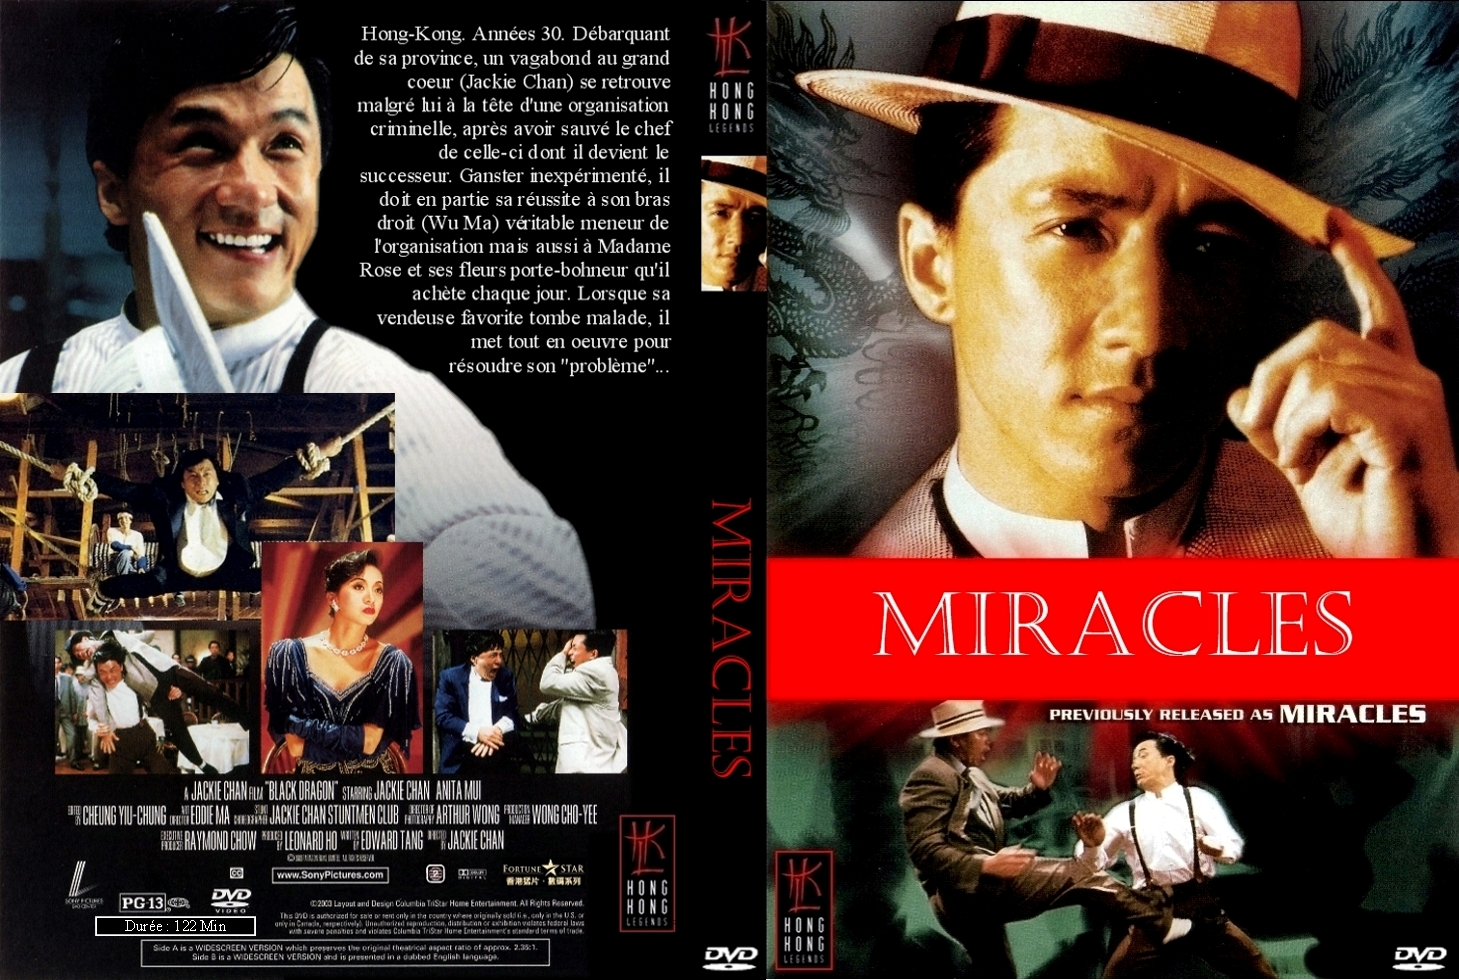 Jaquette DVD Miracles (Jackie Chan)